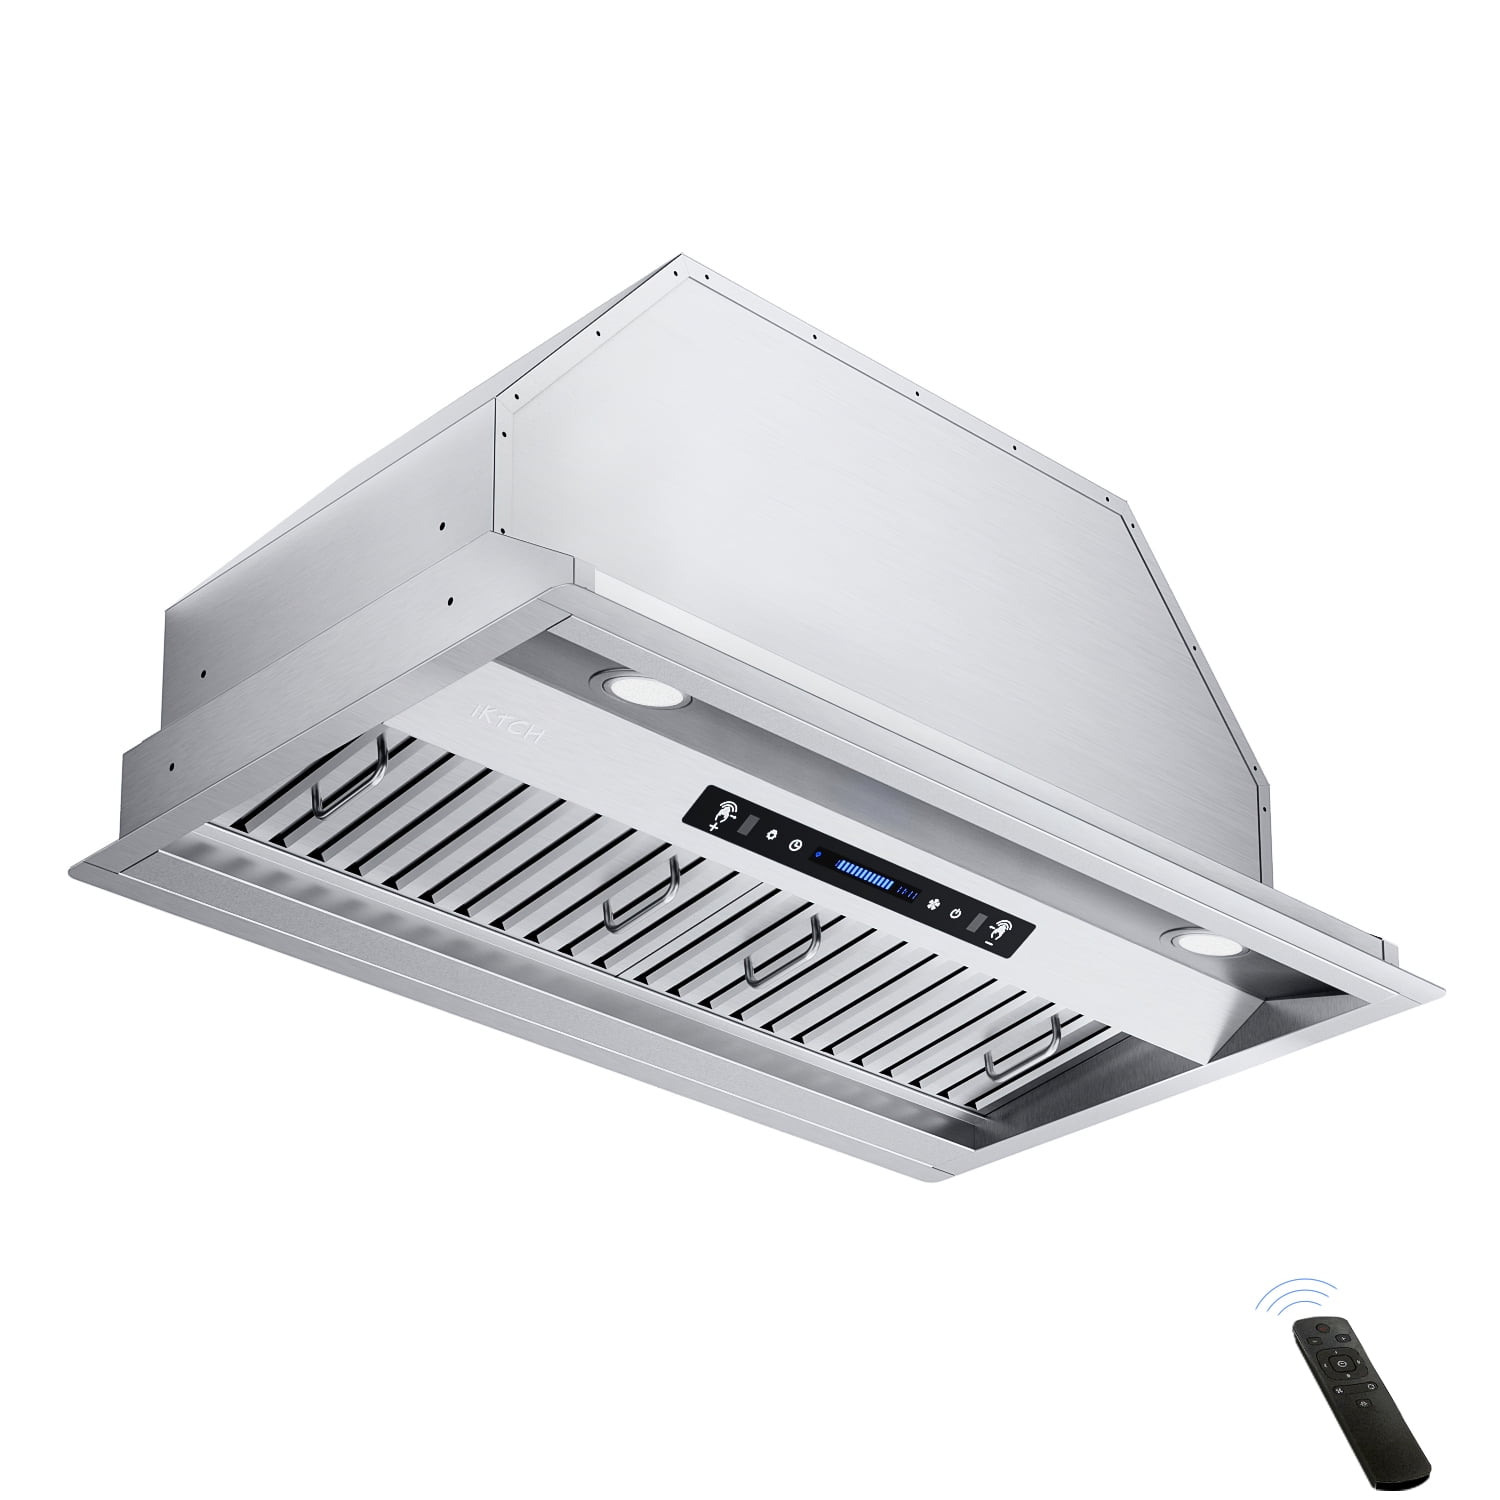  FIREGAS Range Hood Insert 30 inch, Ducted/Ductless Range Hoods  800CFM, Kitchen Vent Hood with 3 Speed Exhaust Fan, 2 Baffle Filters, Touch  and Gesture Sensing Control Built in Stove Hood : Appliances